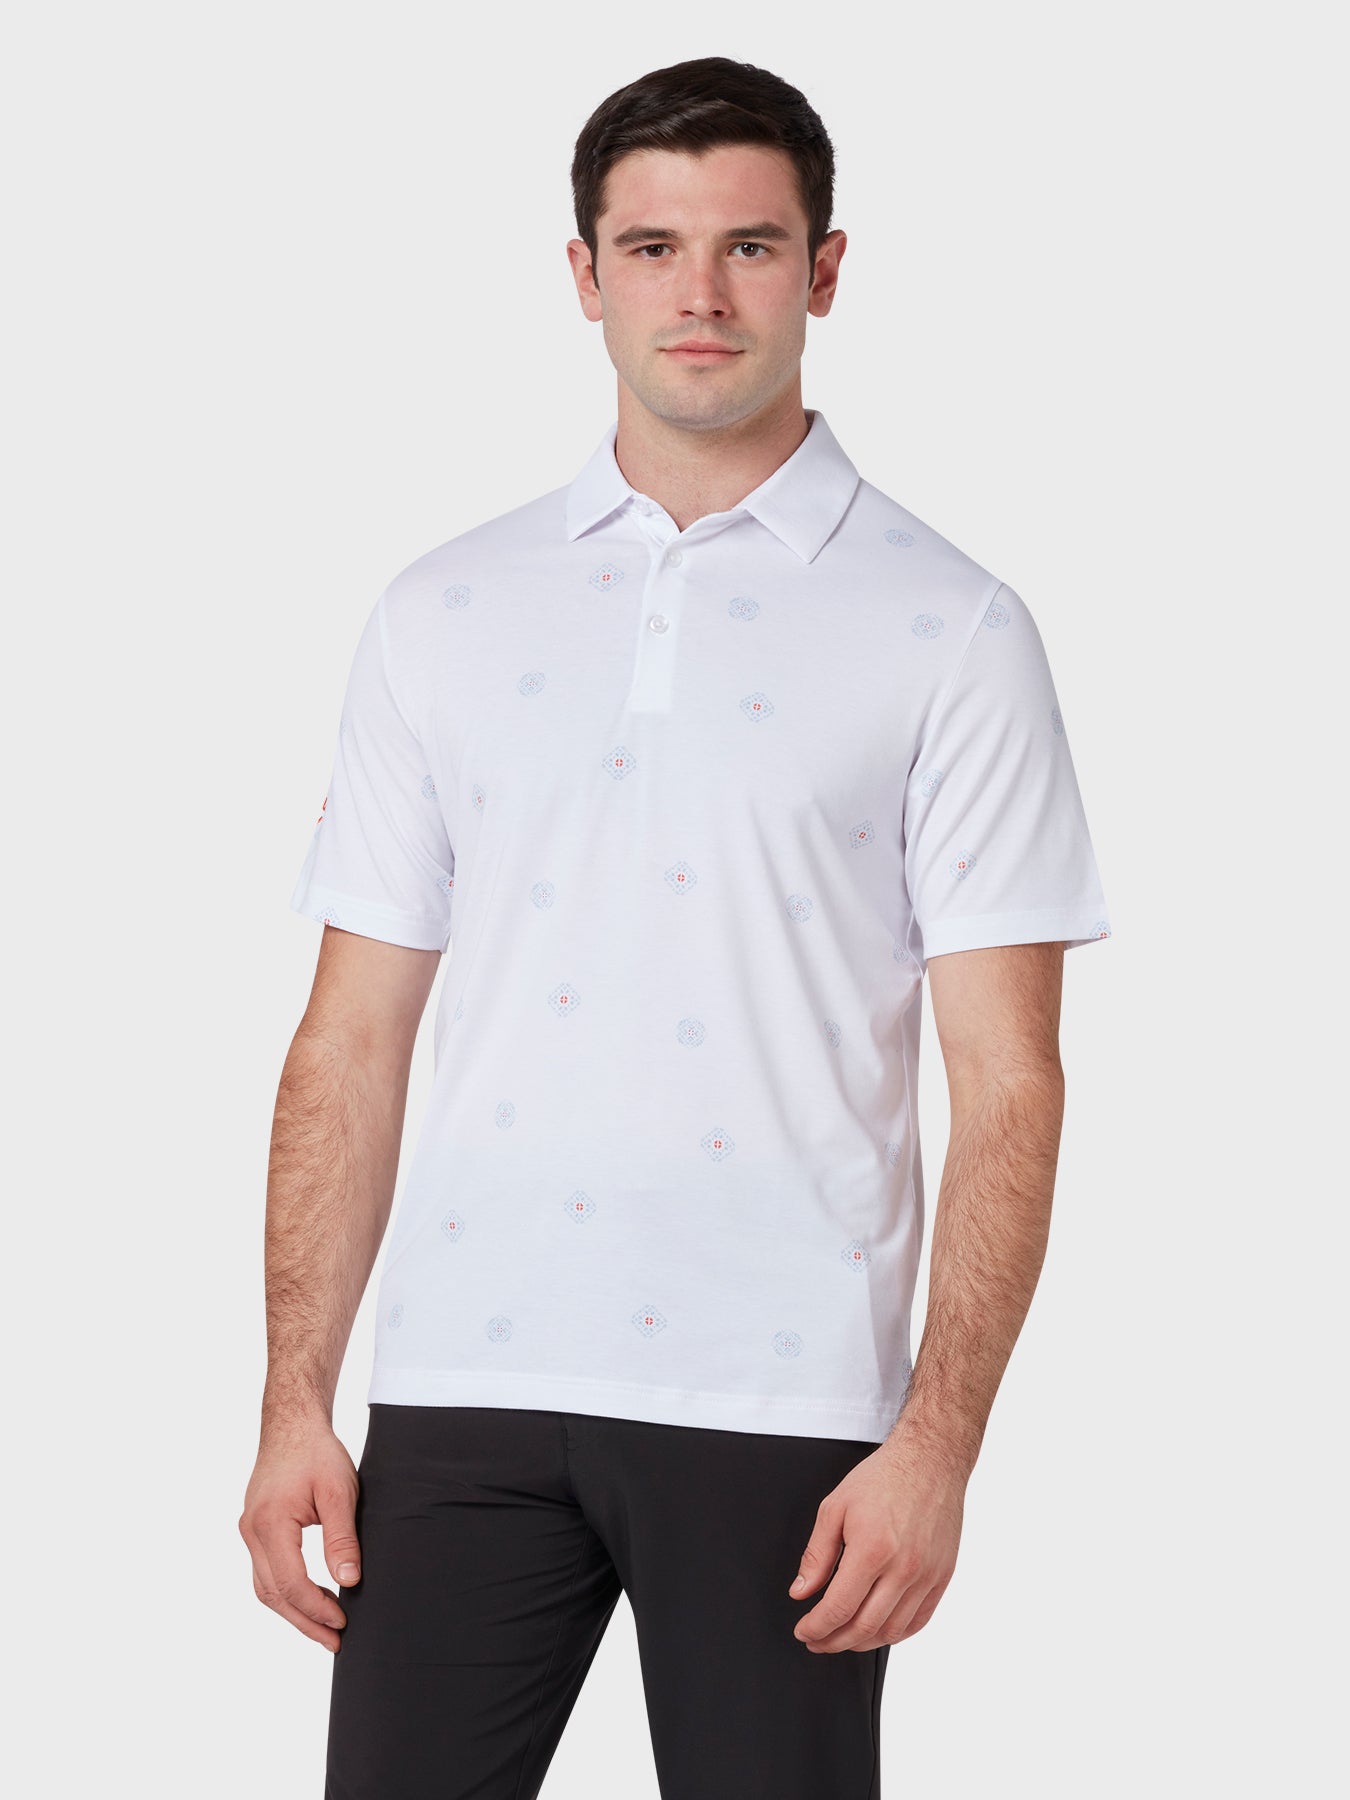 View Classic Foulard Print Polo In Bright White information